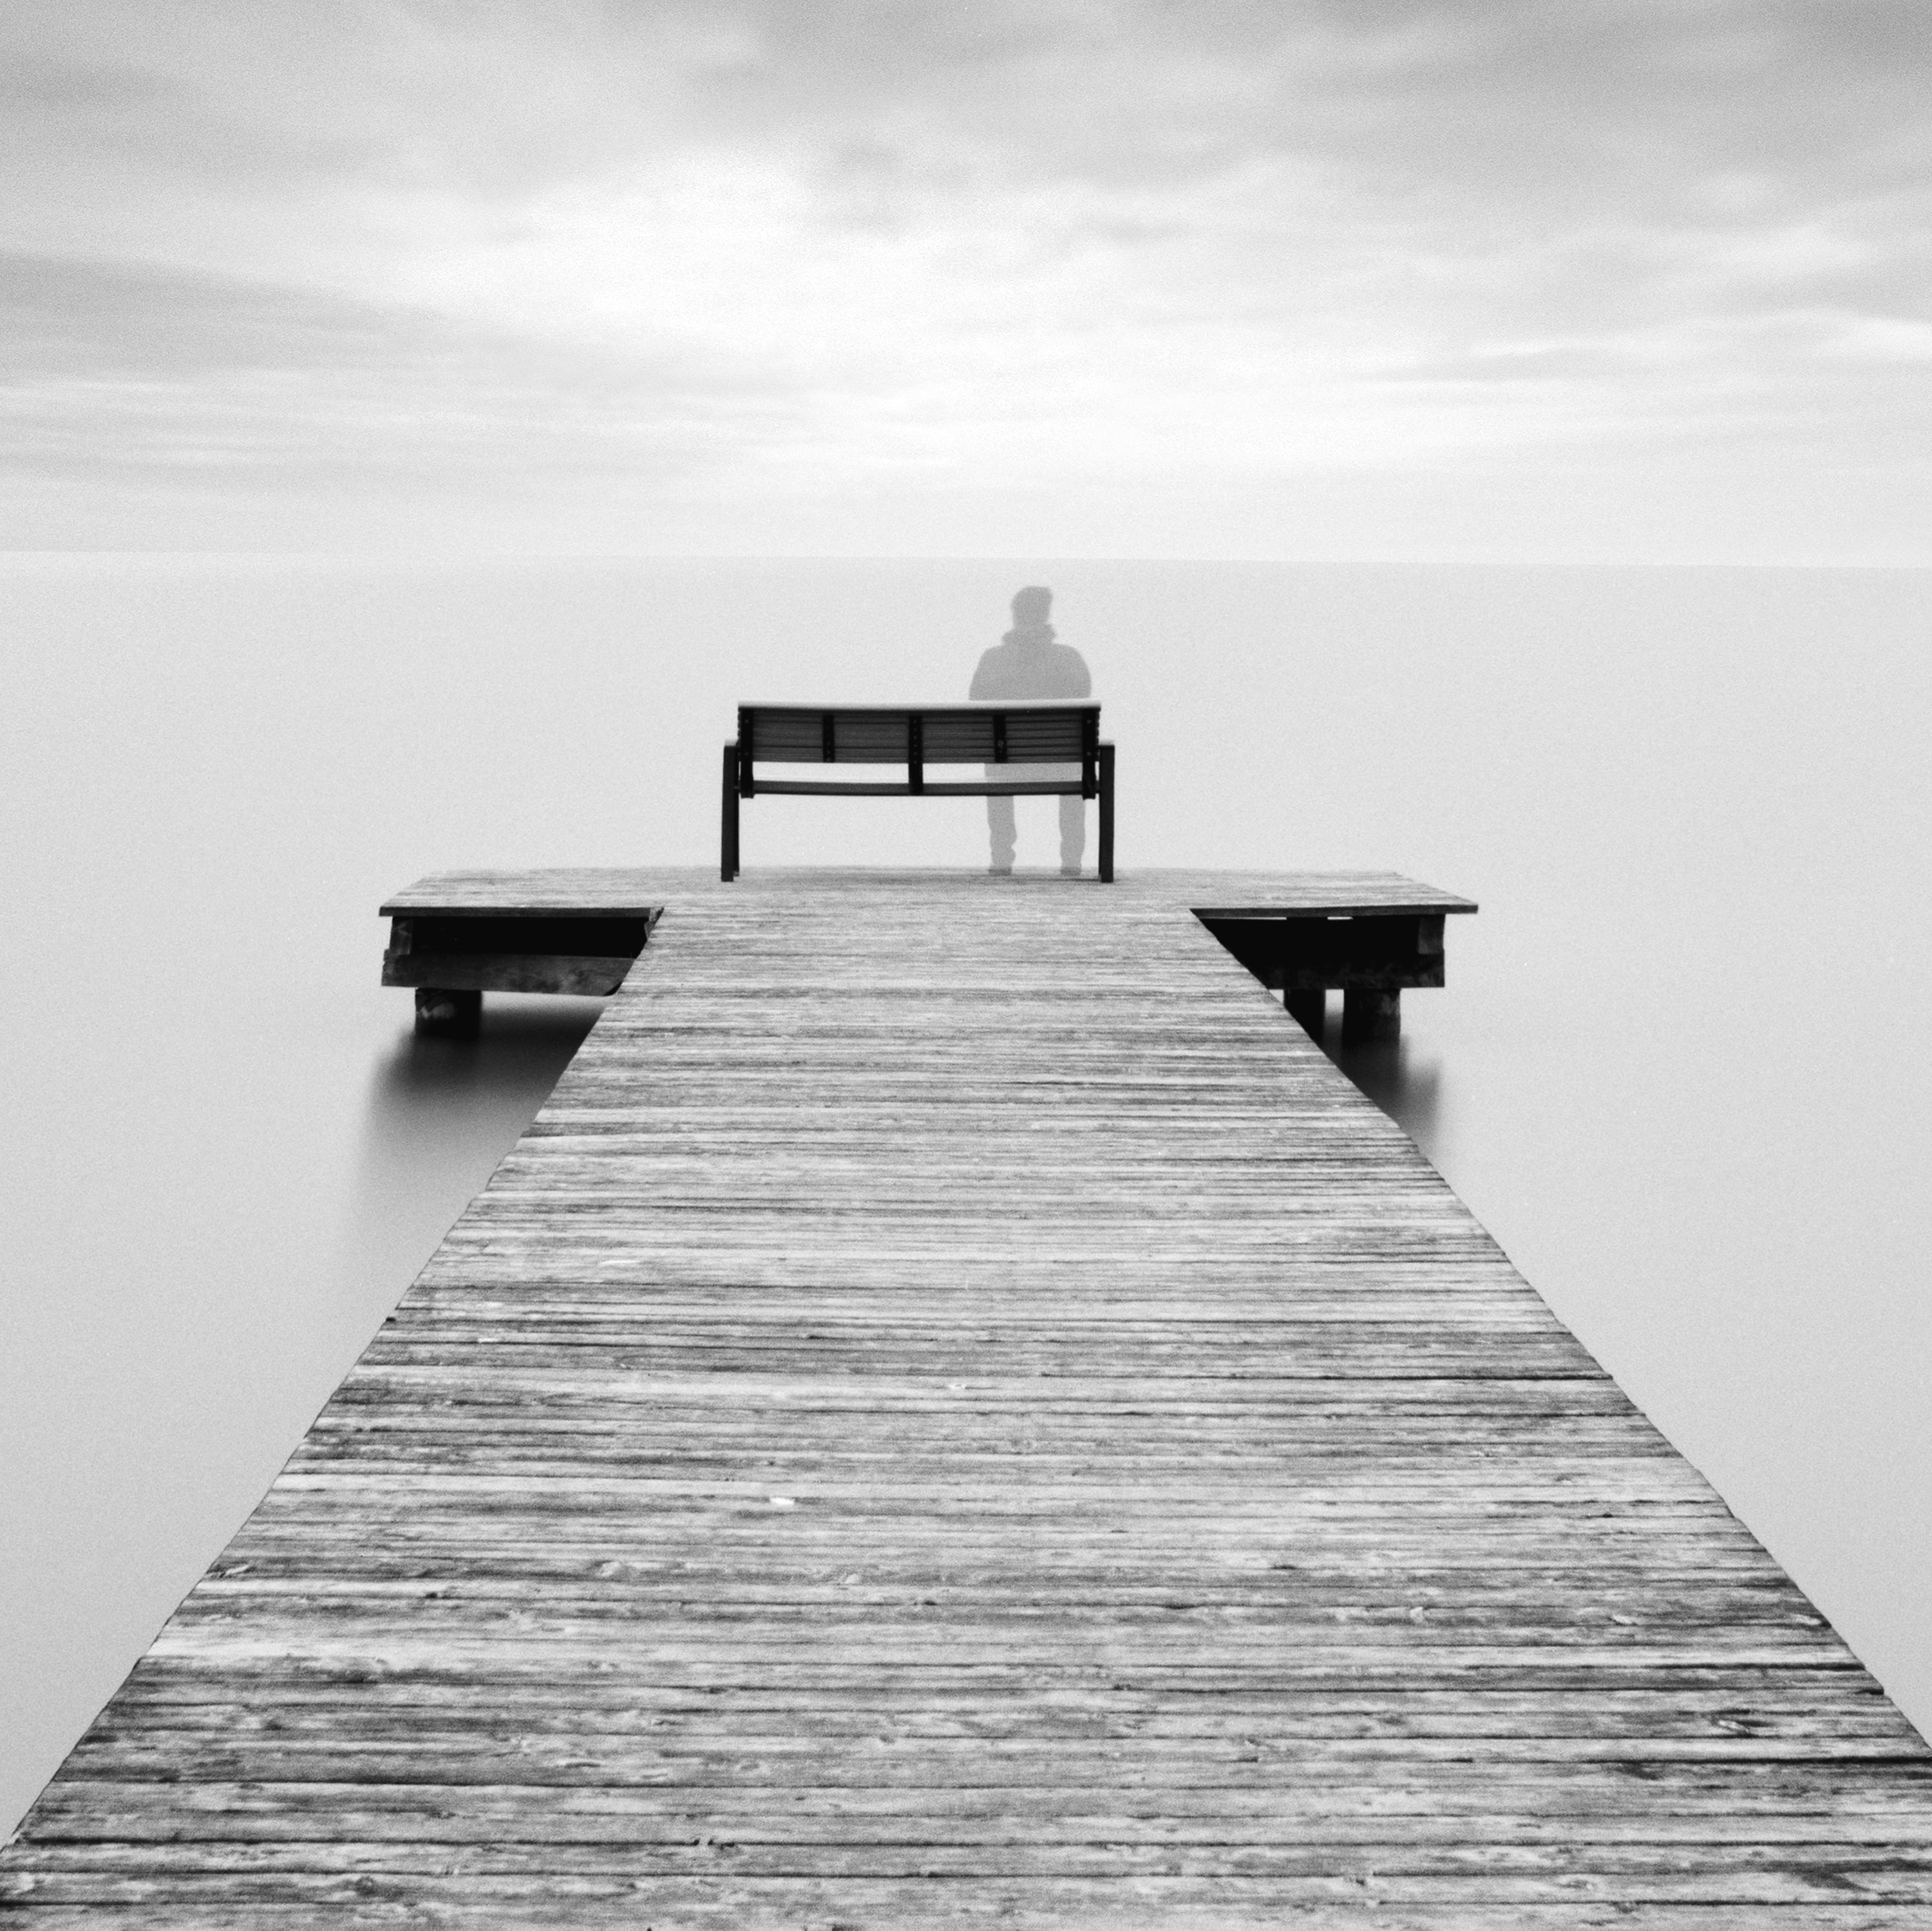 Self Portrait, lake, storm, black and white long exposure waterscape photography For Sale 4